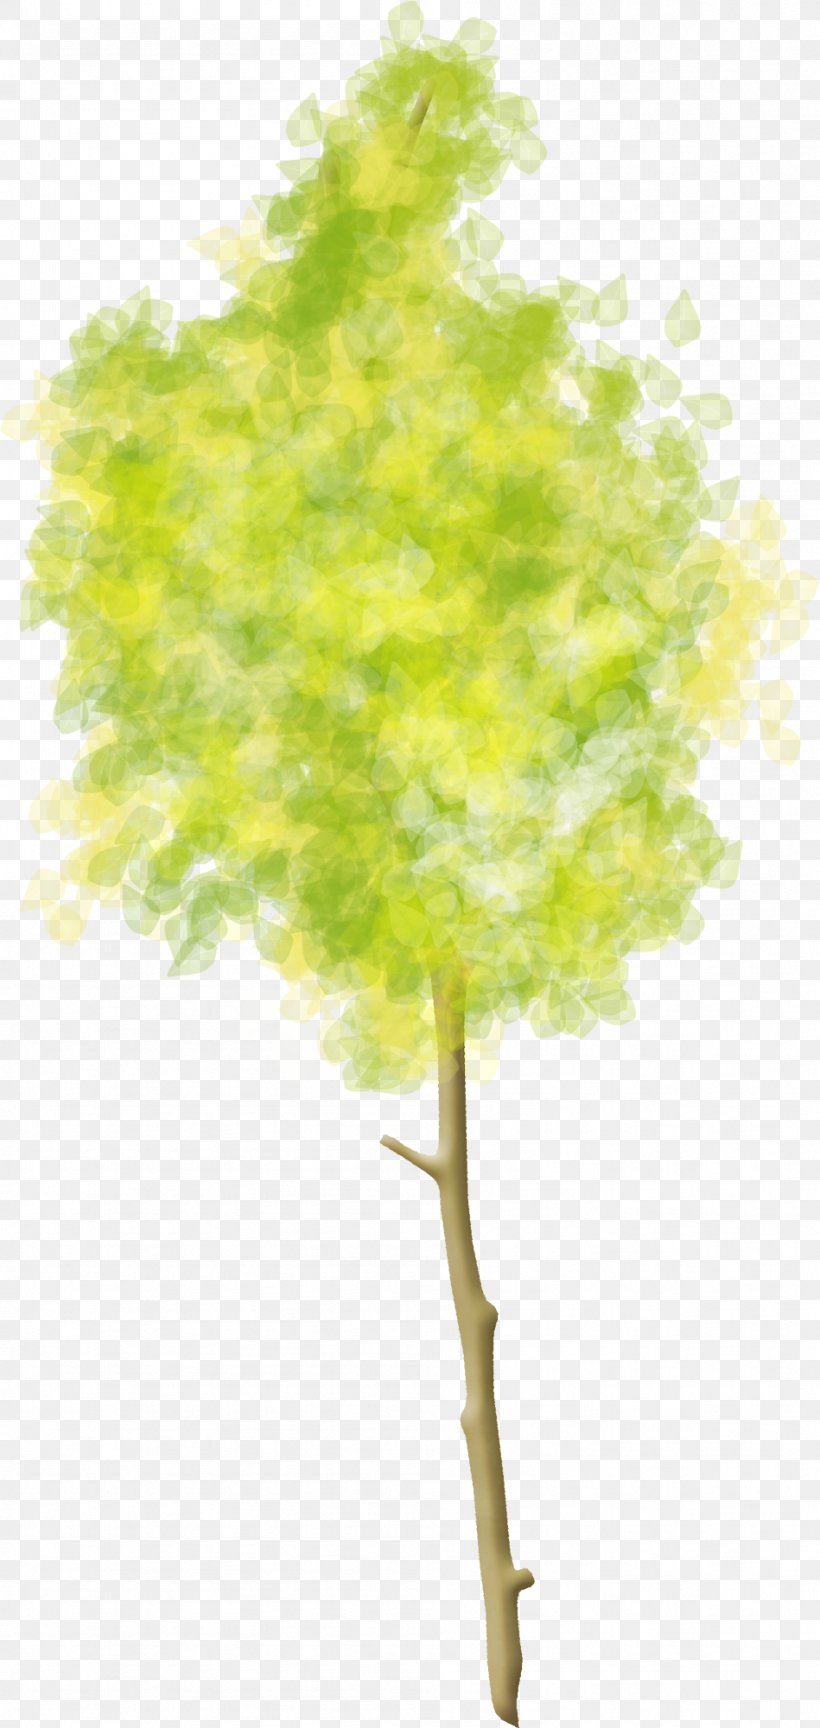 Tree Woody Plant Clip Art, PNG, 949x2000px, Tree, Branch, Leaf, Plane Tree Family, Plane Trees Download Free